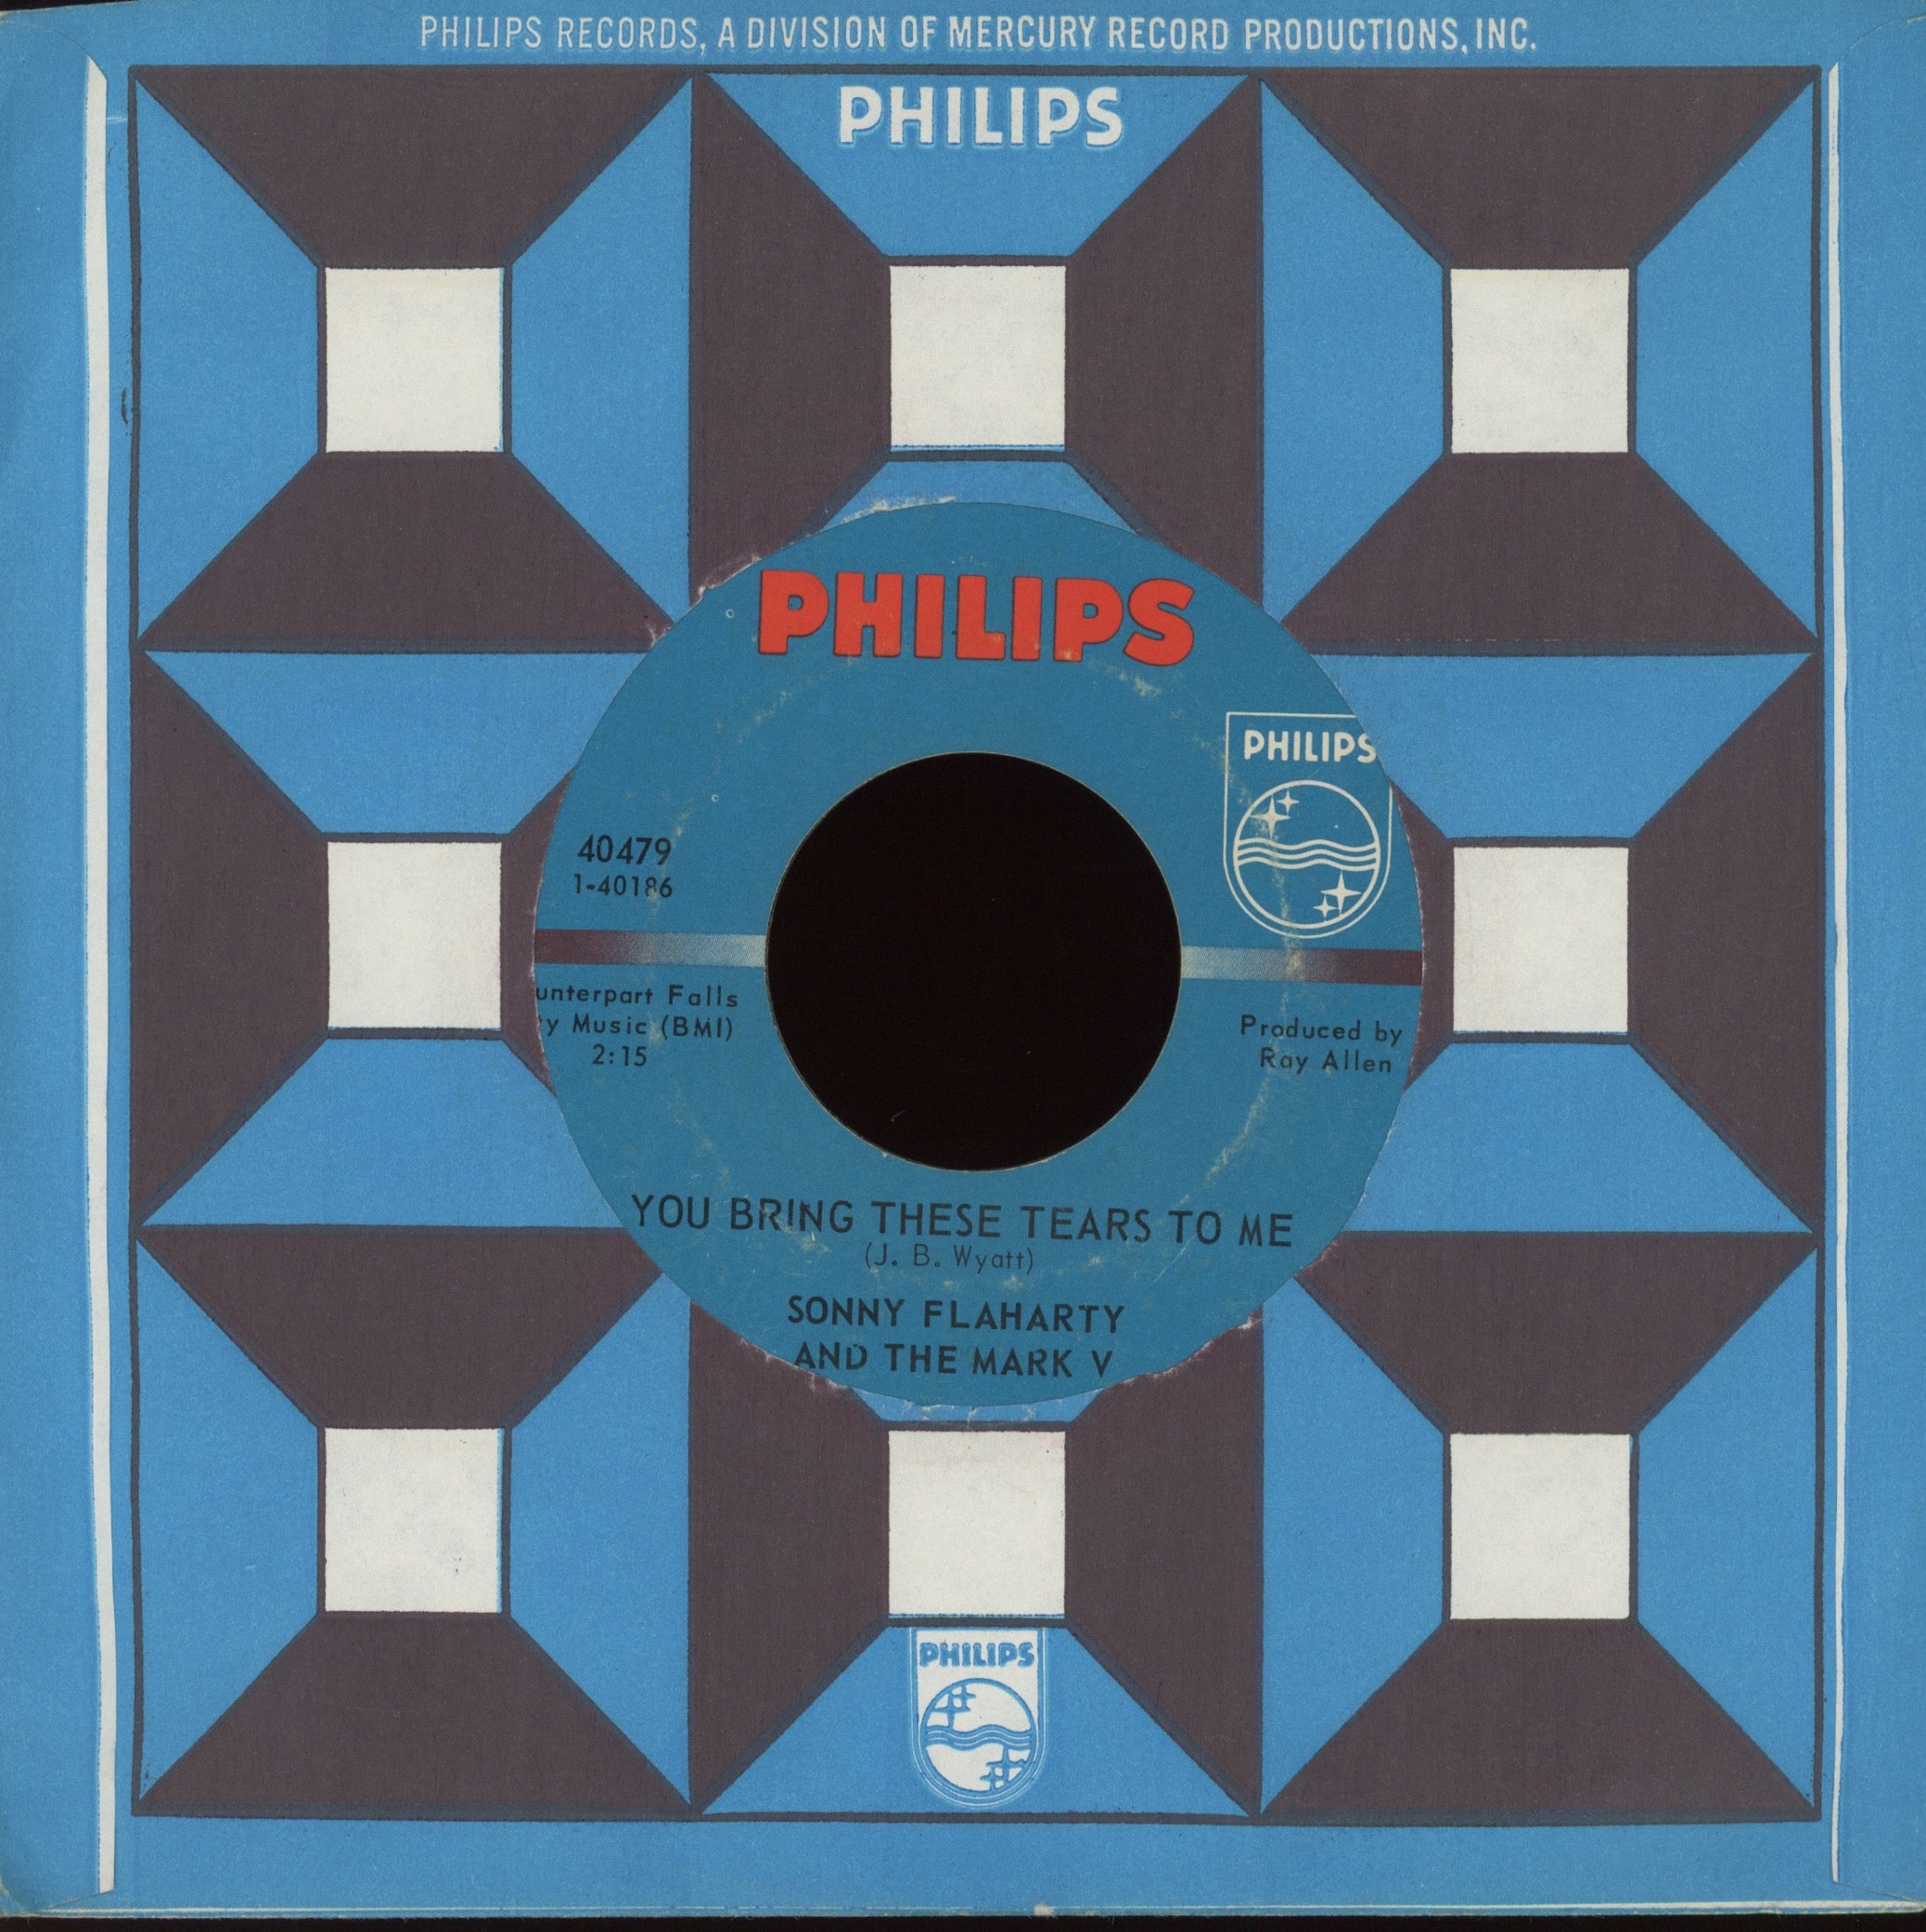 Sonny Flaharty & The Mark V - Hey Conductor on Philips Garage Fuzz 45